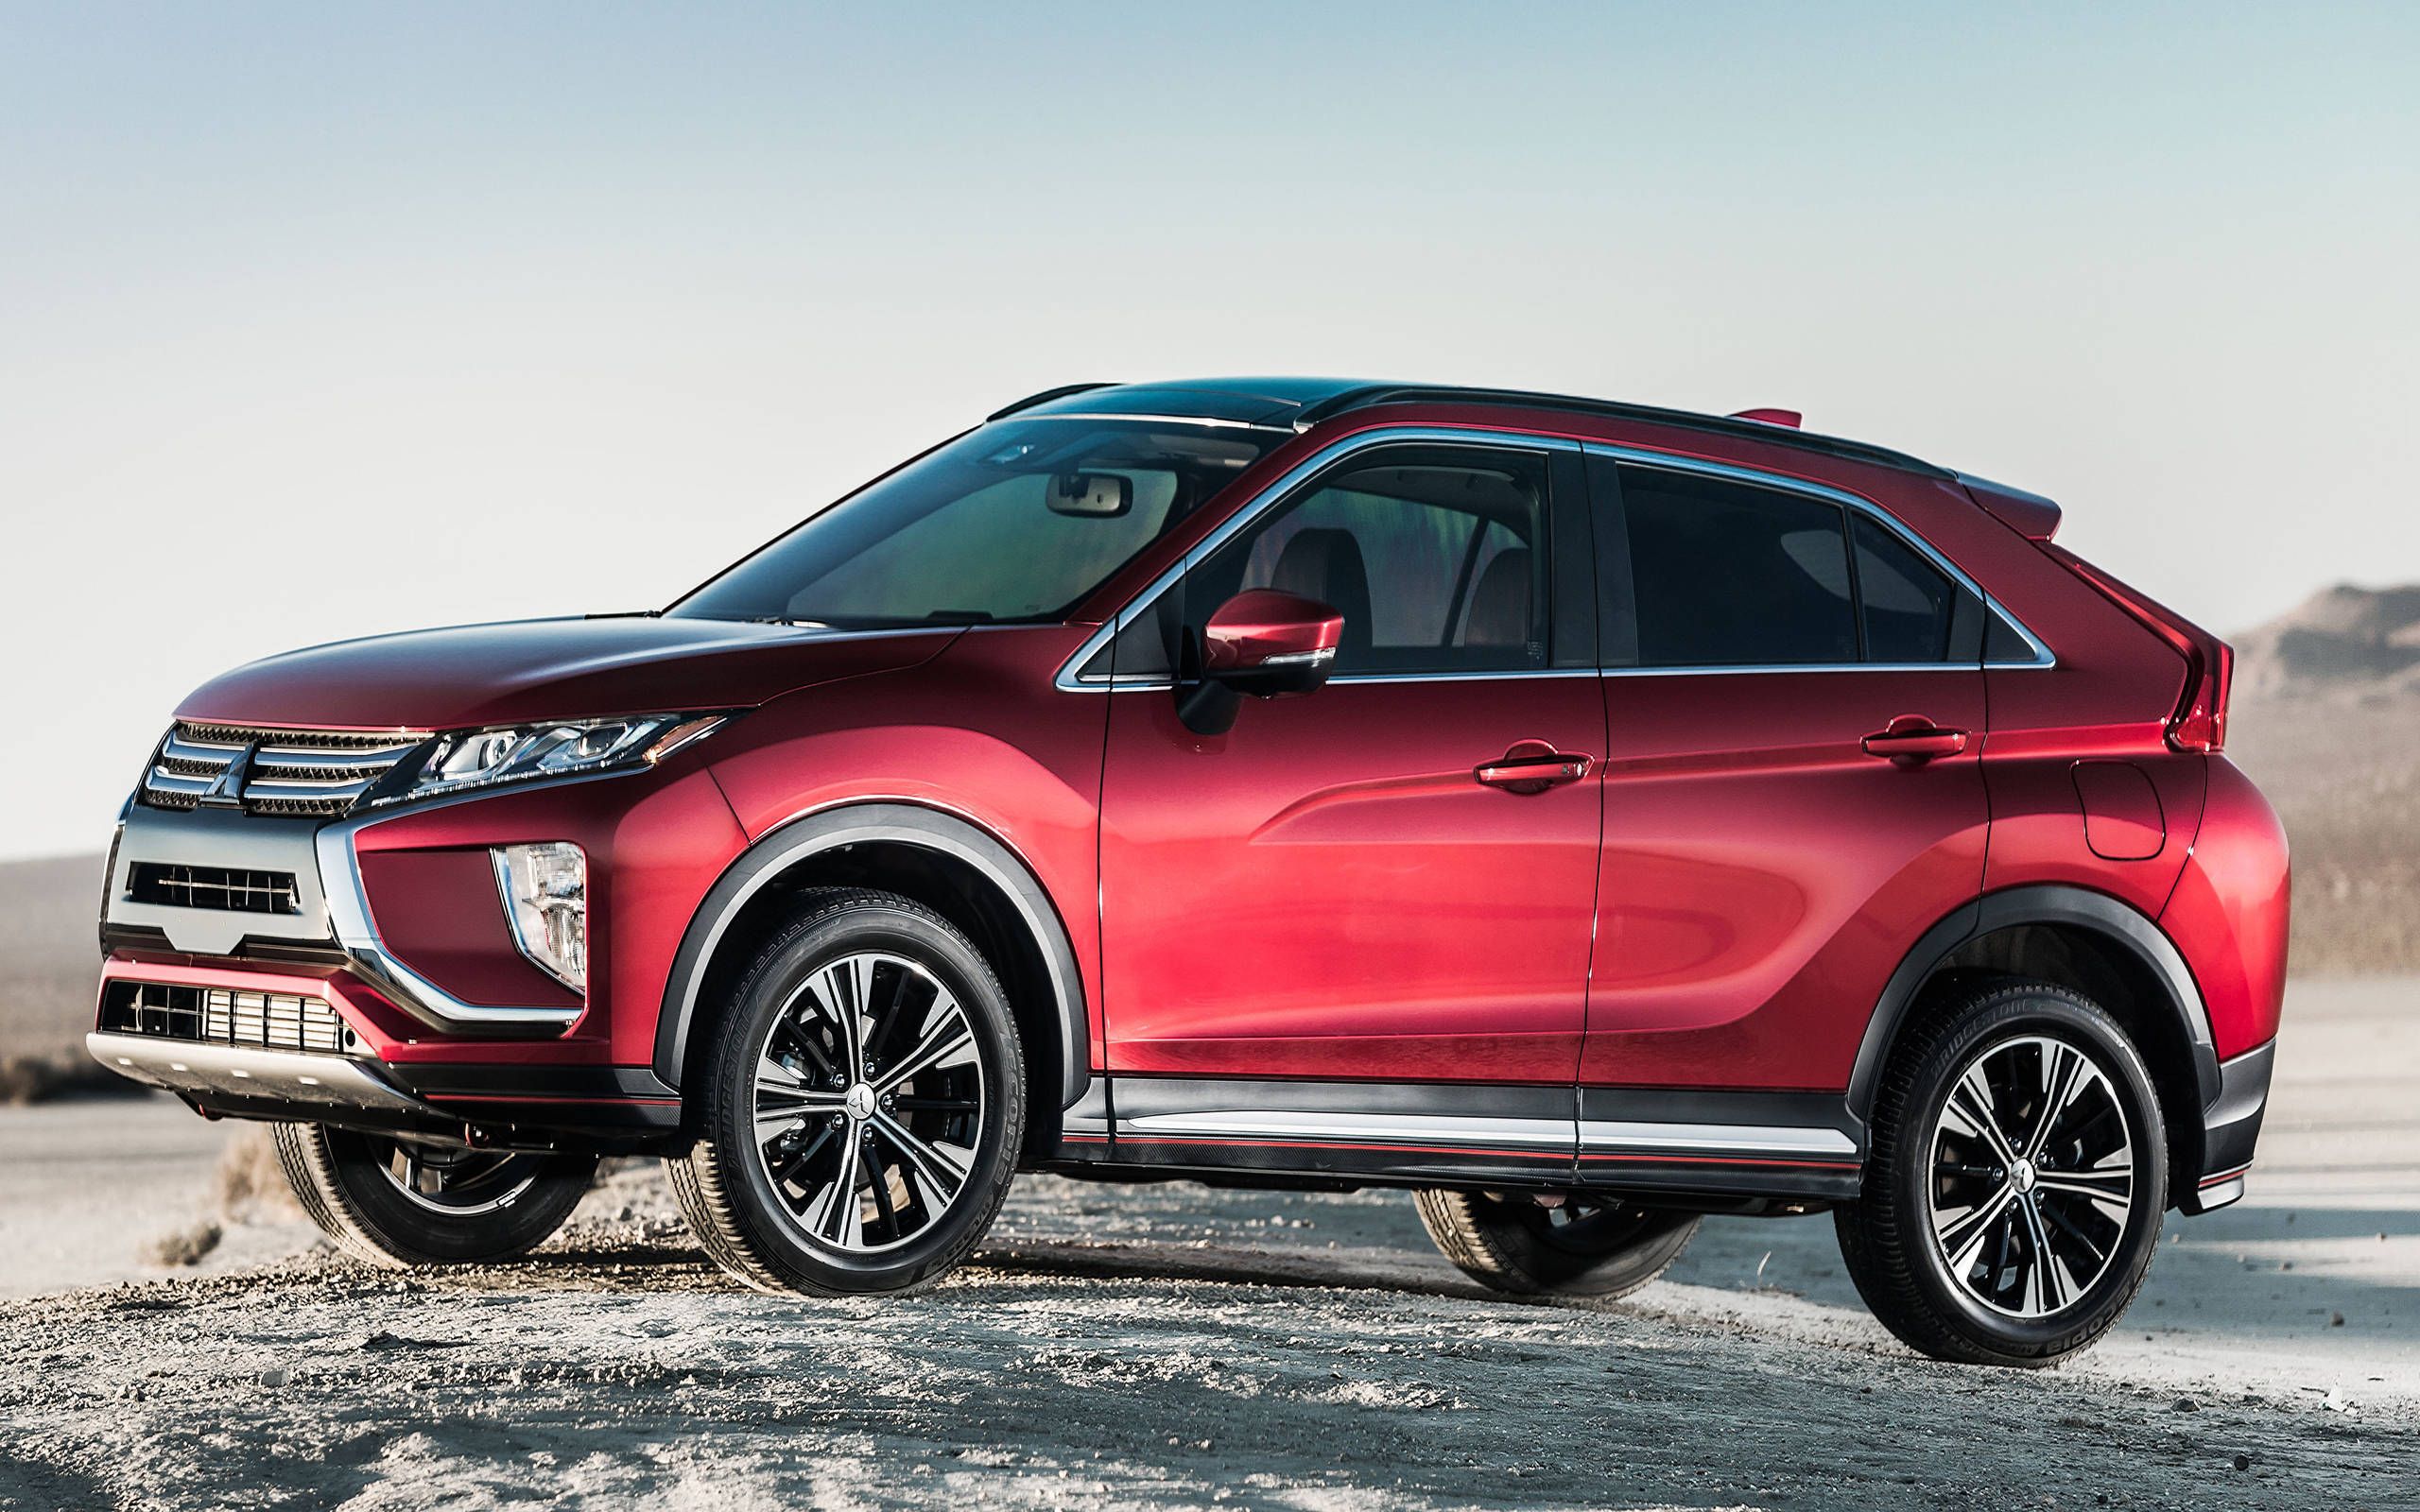 2018 Mitsubishi Eclipse Cross first drive: Style first